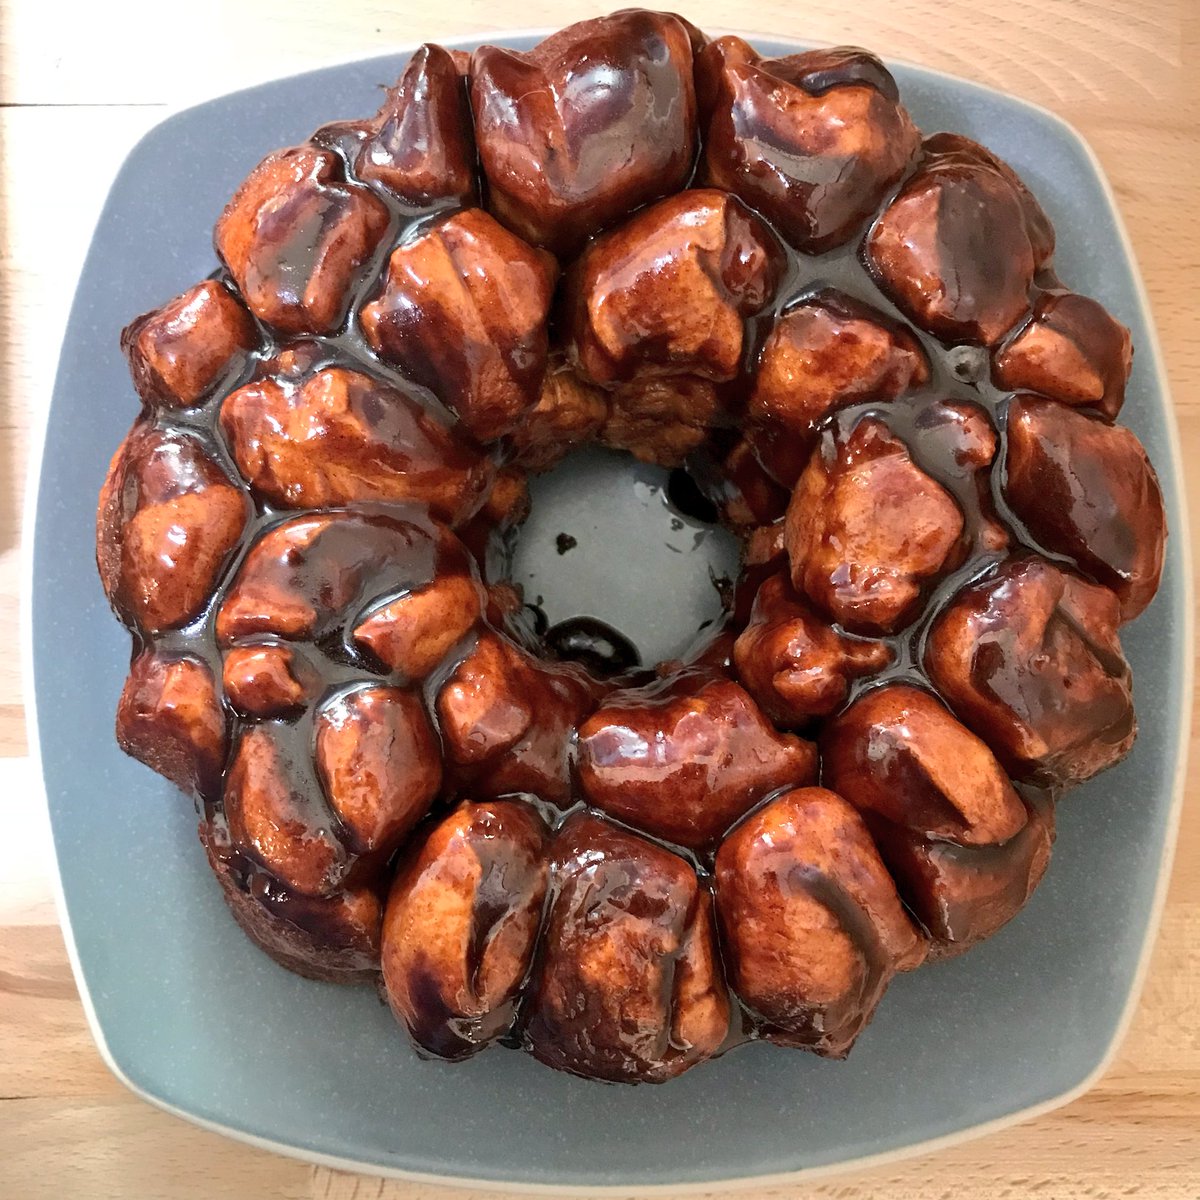 Bread #12: Monkey Bread. took me months to get to this one because I was trying to lay off dessert but I made it and brought it to a BBQ. it was a huge hit, easy, flavorful, and way better than the Pillsbury version. Would be a fun recipe for kids. Def need to eat it hot though.